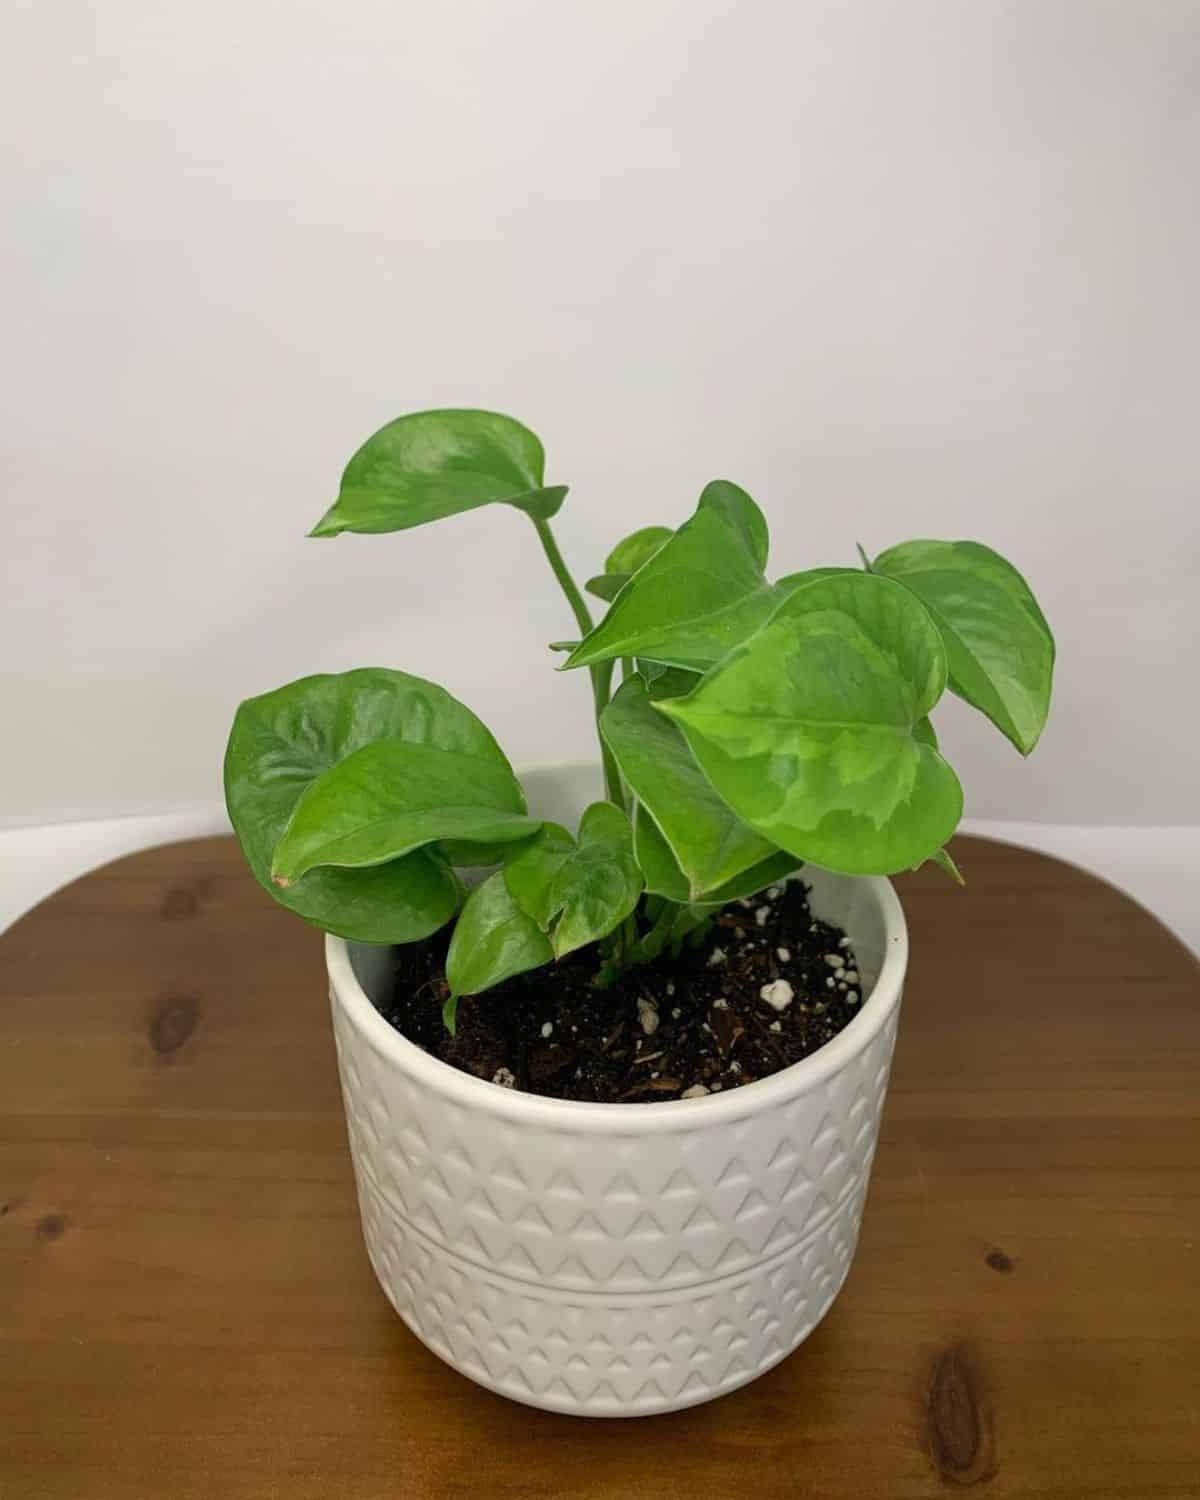 An Emerald Pothos in a white pot on a wooden table.